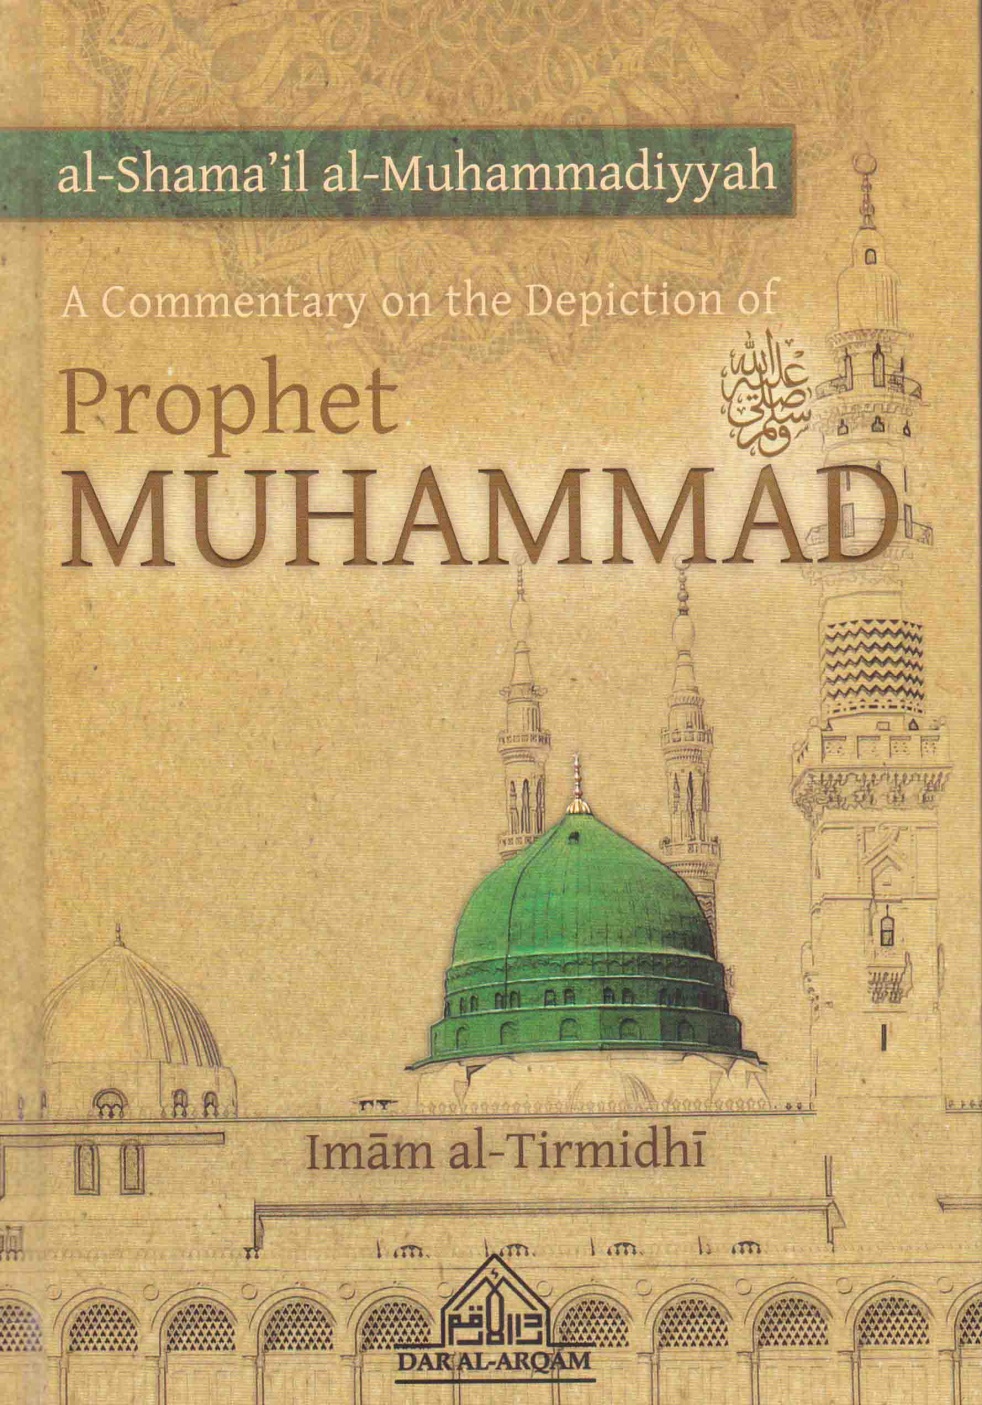 030 The Perfect Example | Chapter 49: The Modesty of the Prophet  | Walid Molhem